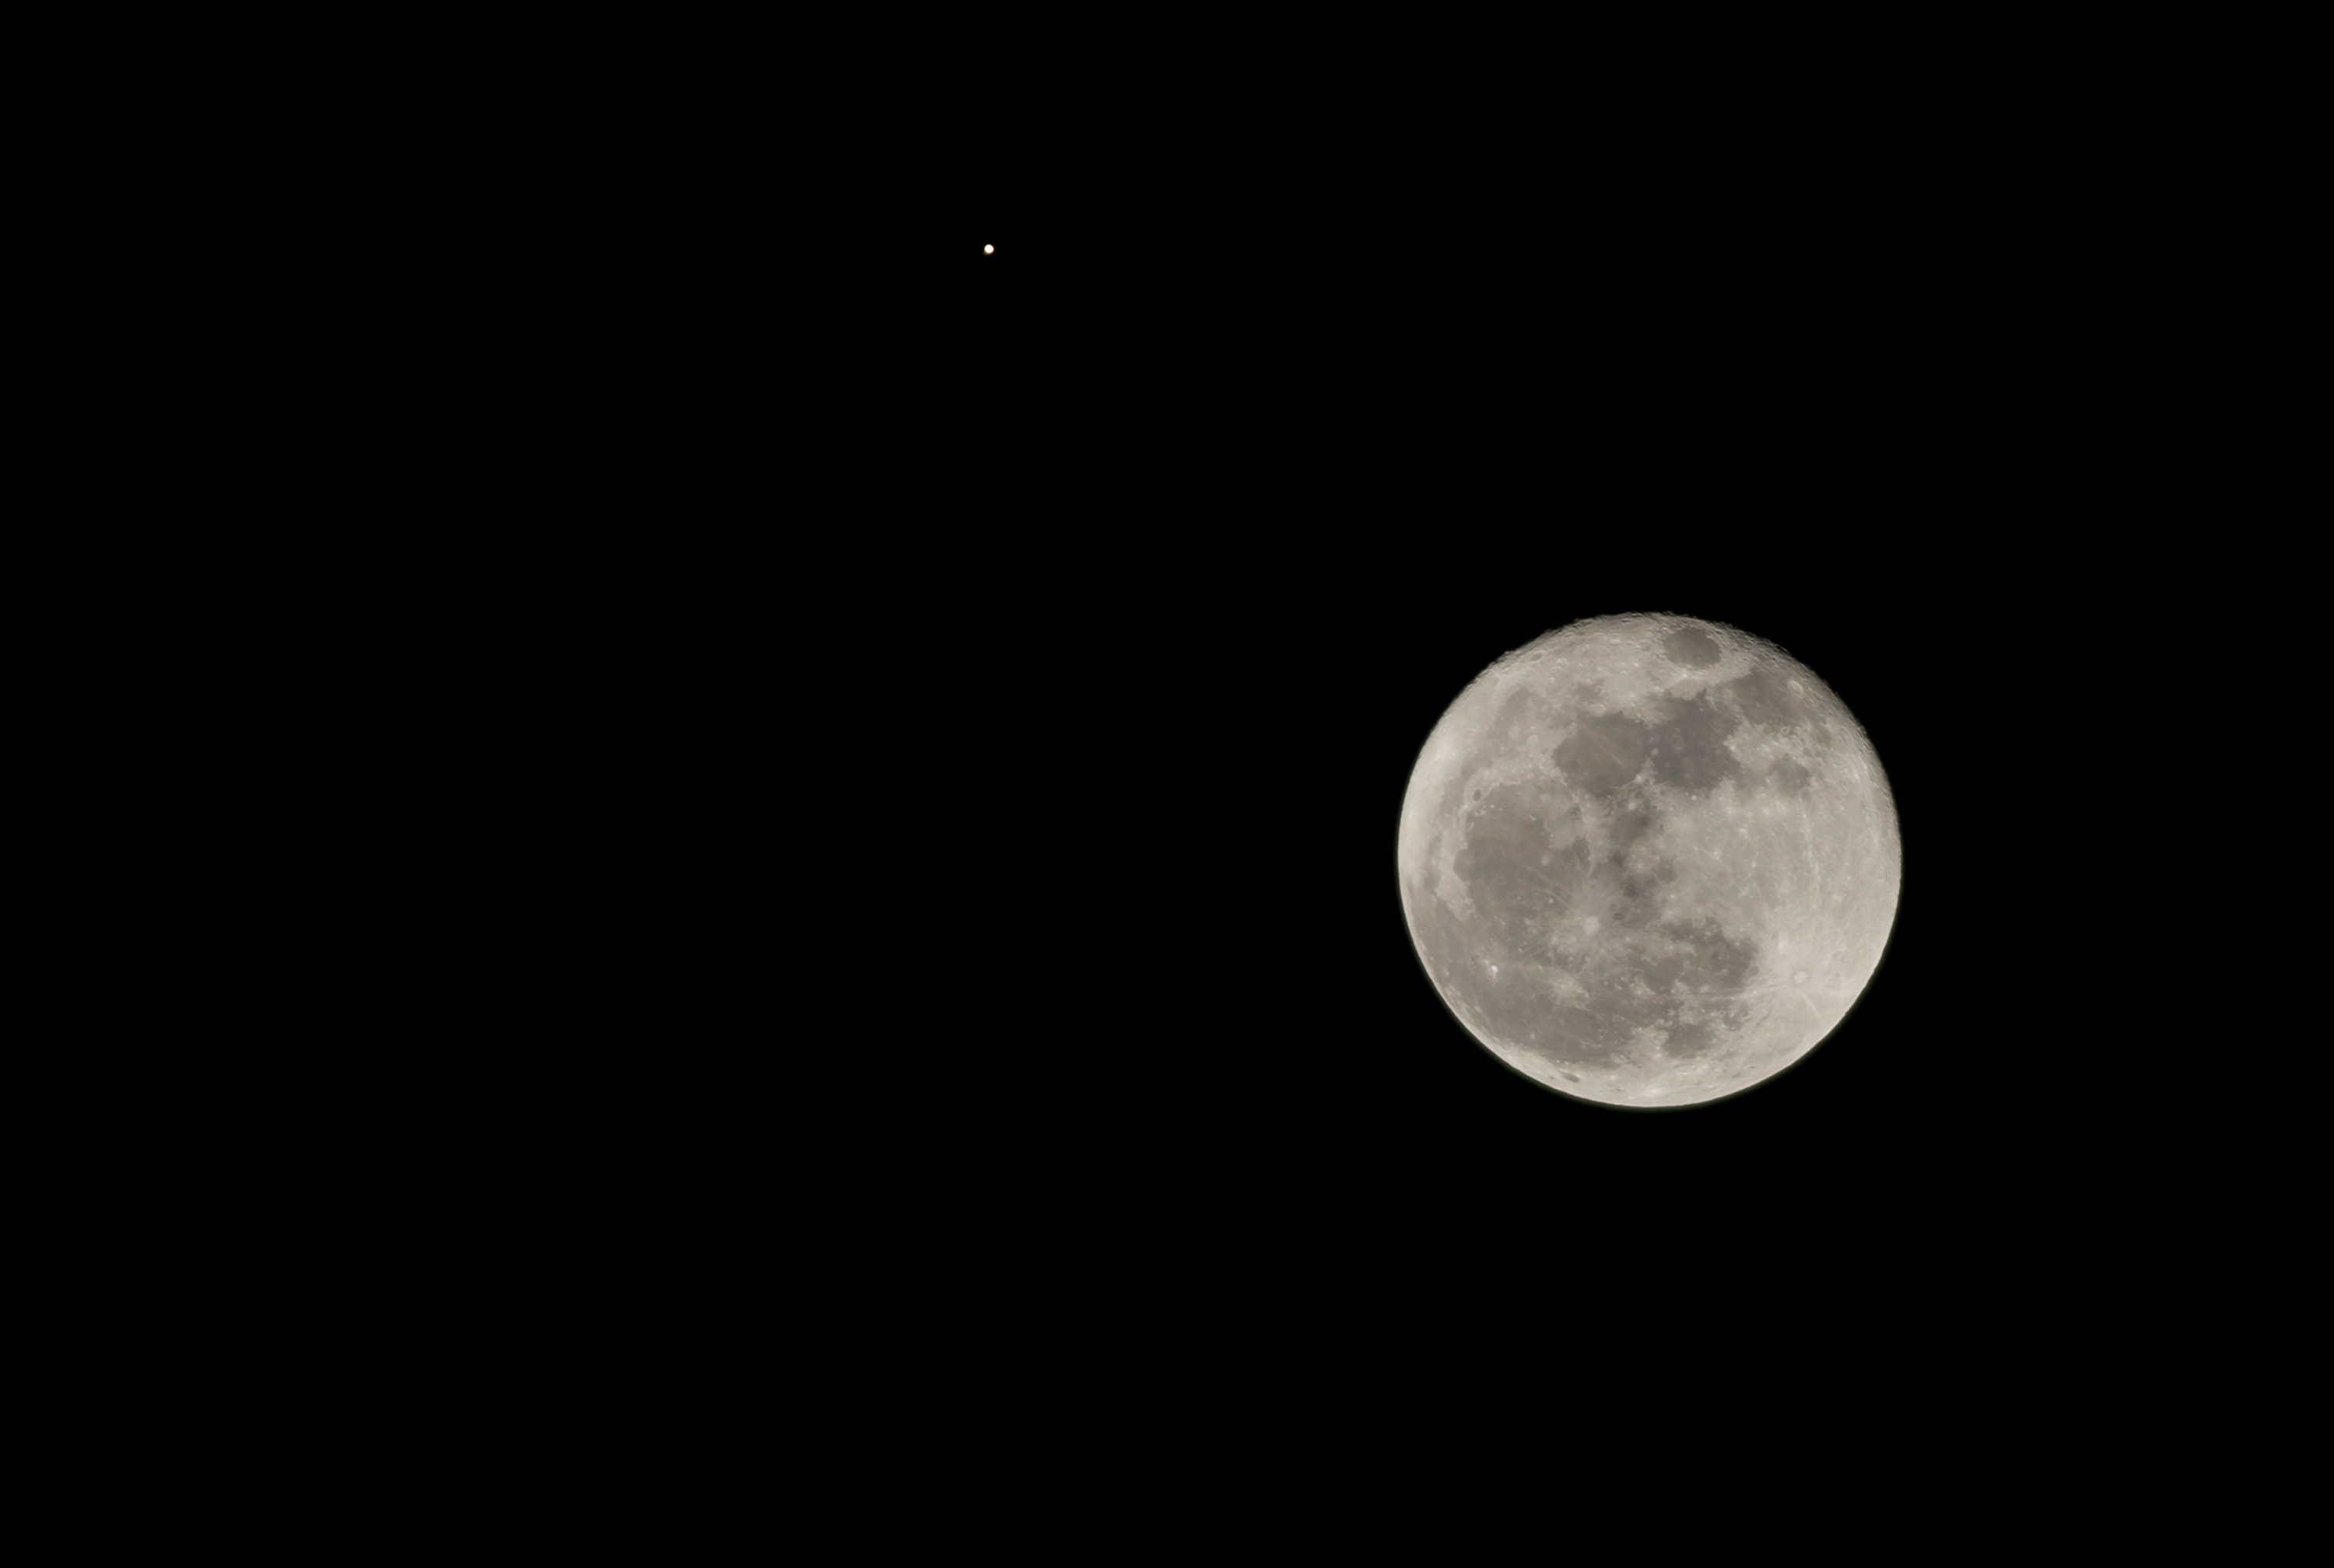 View of the moon alongside planet Mars, as seen from Bogota City on October 02, 2020.